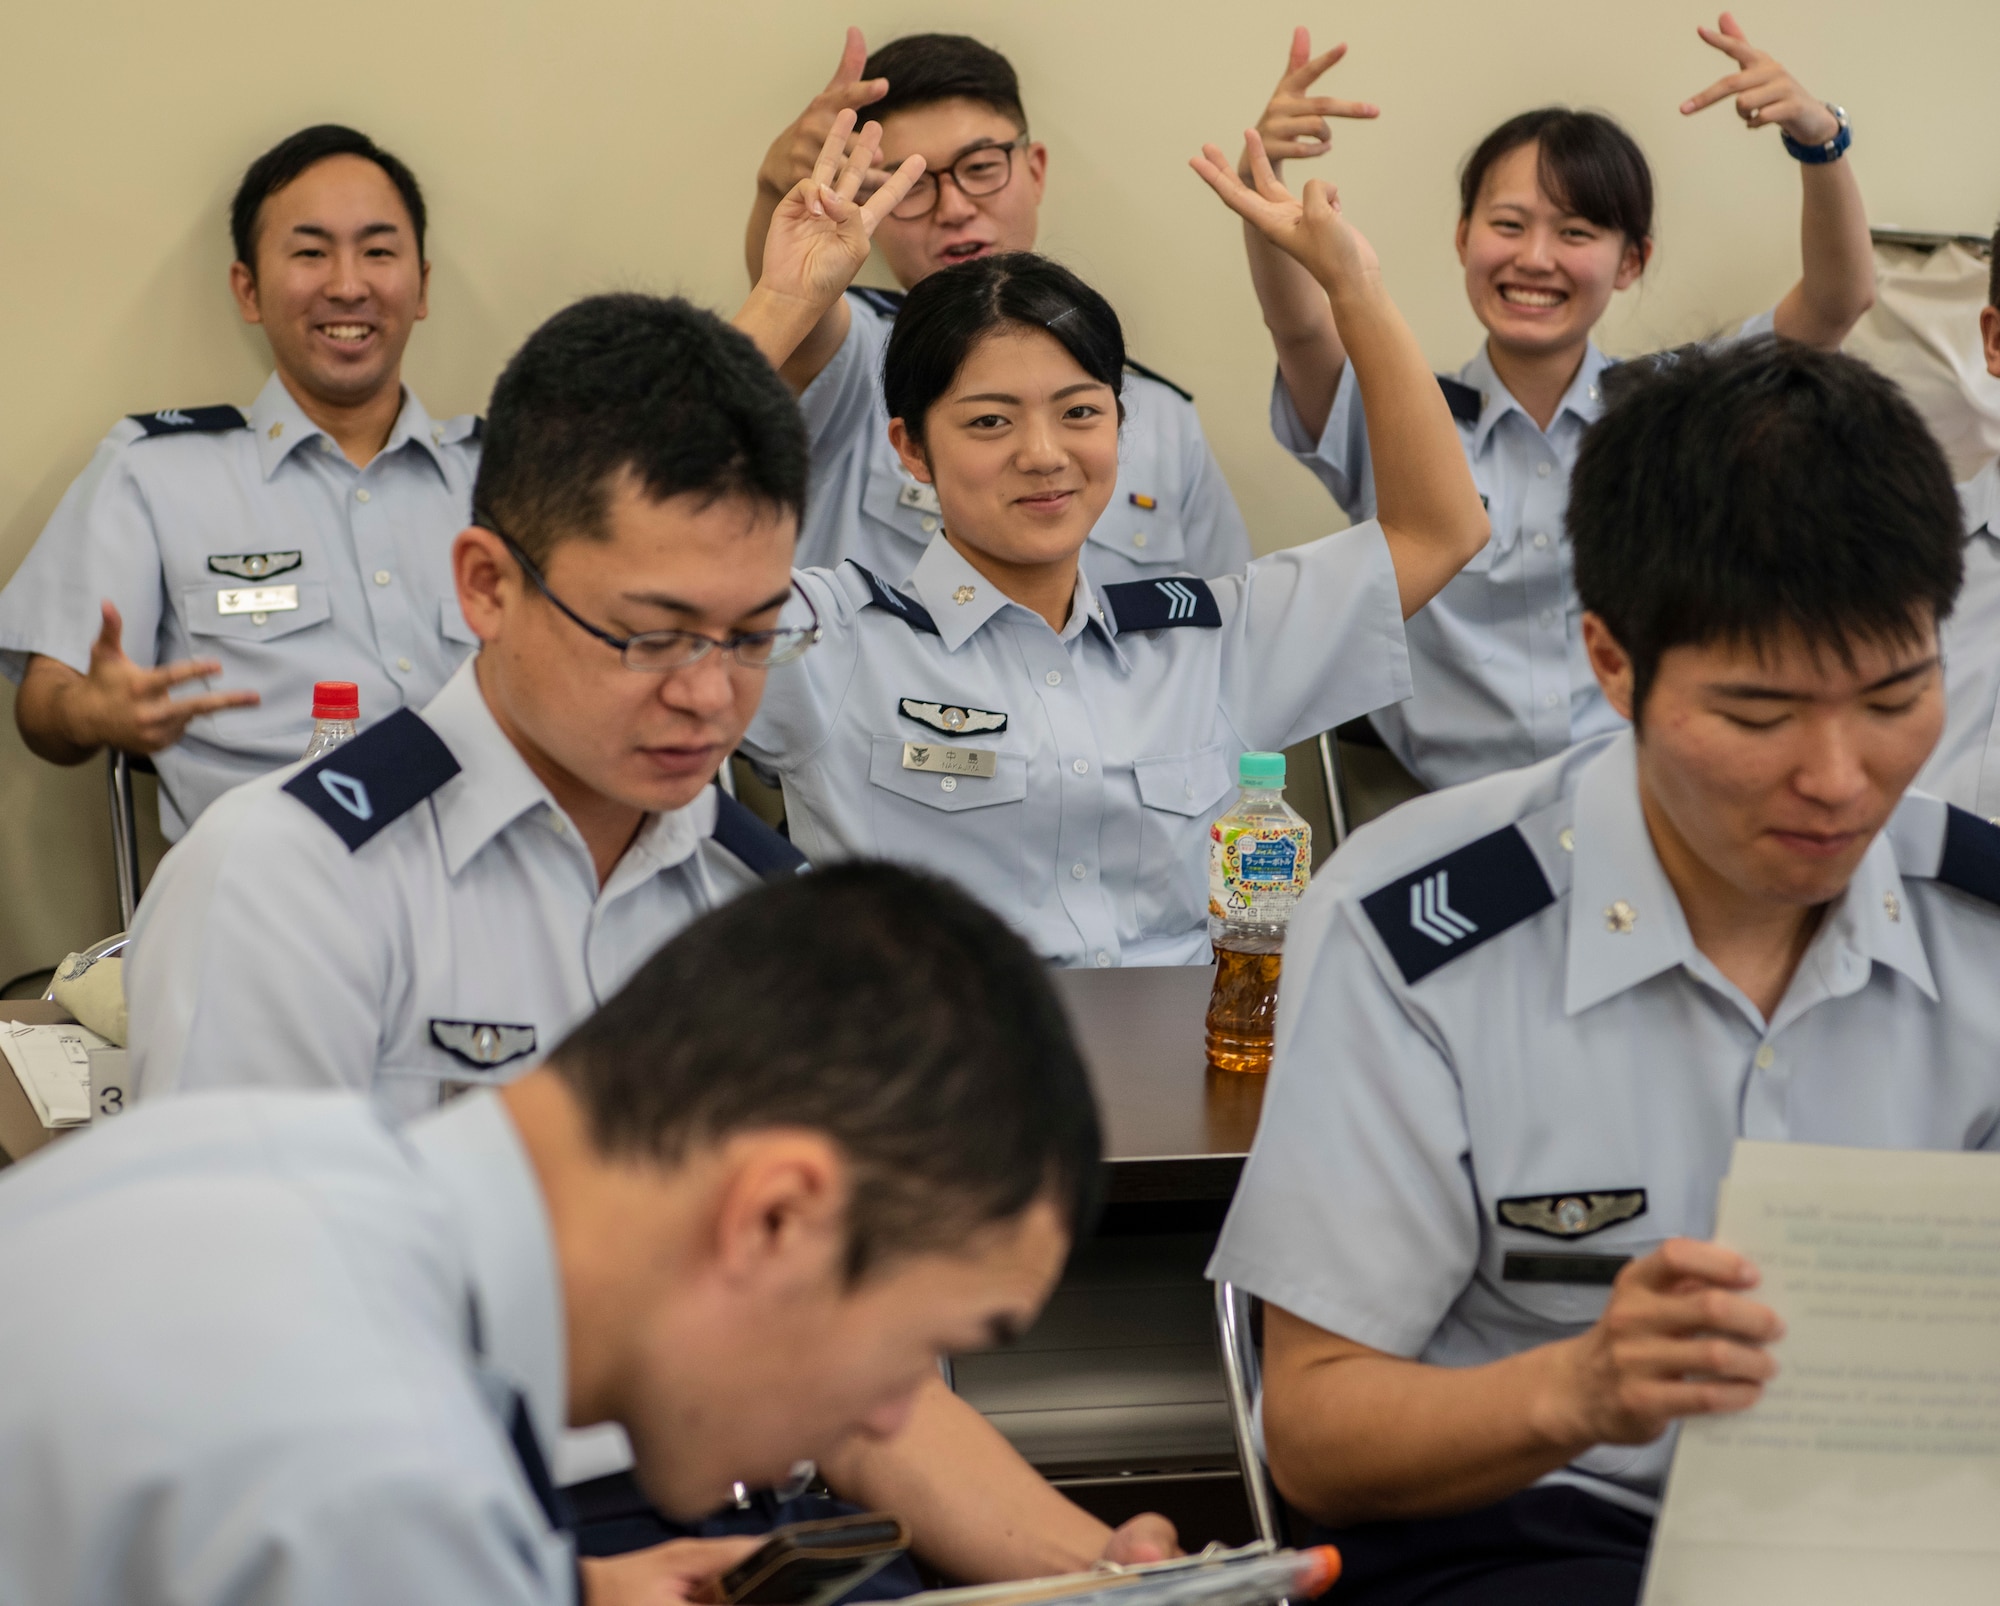 Japan Air Self-Defense Force contestants strike a pose before going on stage during the JASDF English Competition at Misawa Air Base, Japan, Aug. 30, 2018. Approximately 35 members participated and each group prepared a slideshow presentation in English for the judges. The enlisted personnel’s piece involved the rank structure and JASDF heritage. The officers talked about threats Japan faces. (U.S. Air Force photo by Airman 1st Class Xiomara M. Martinez)